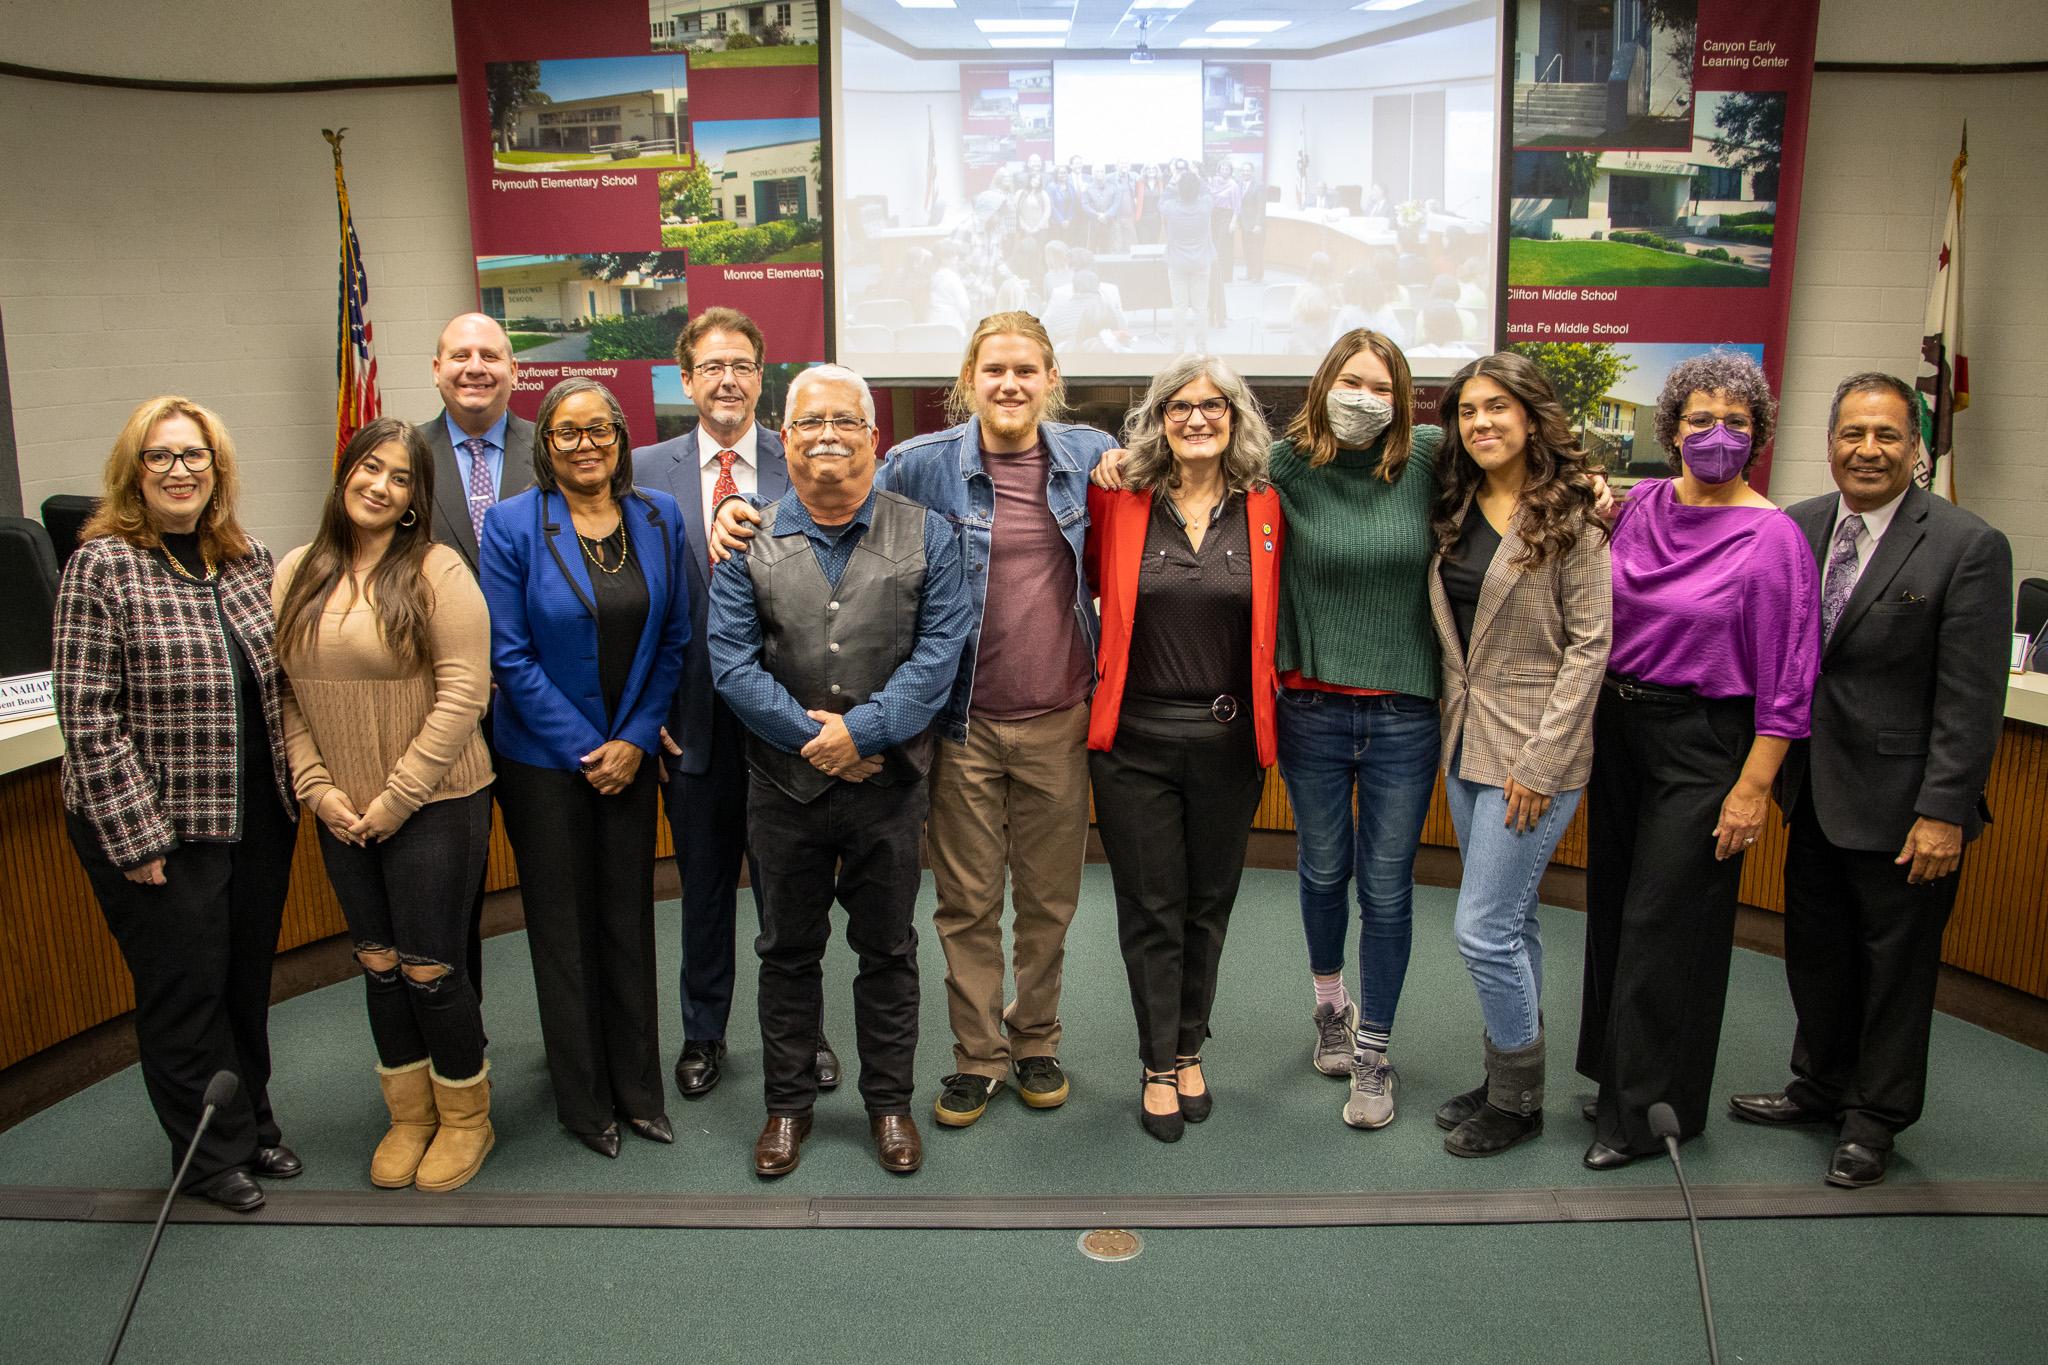 The automotive students and teacher, Mr. Rick Montenegro, shared some updates from the school year and did a fantastic job starting our Board meeting. 